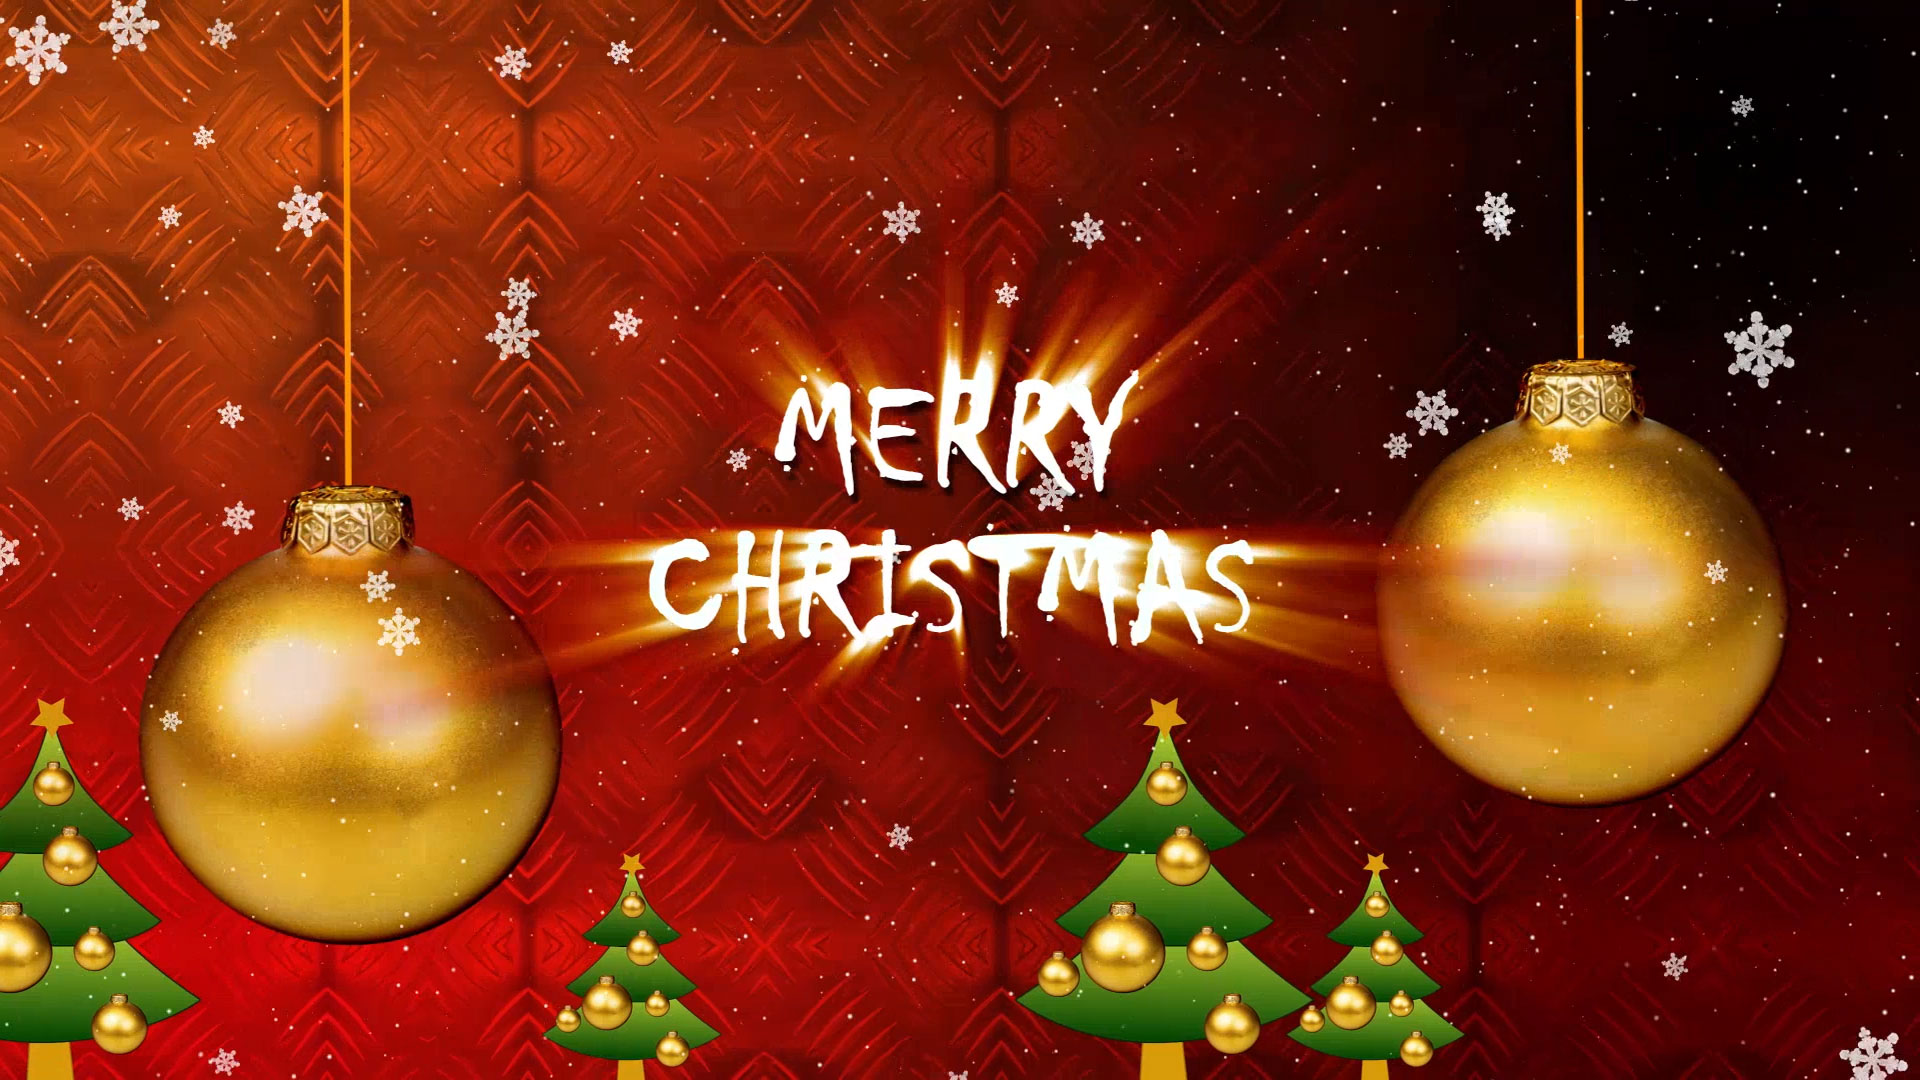 Merry Christmas Greeting Video Download | All Design Creative